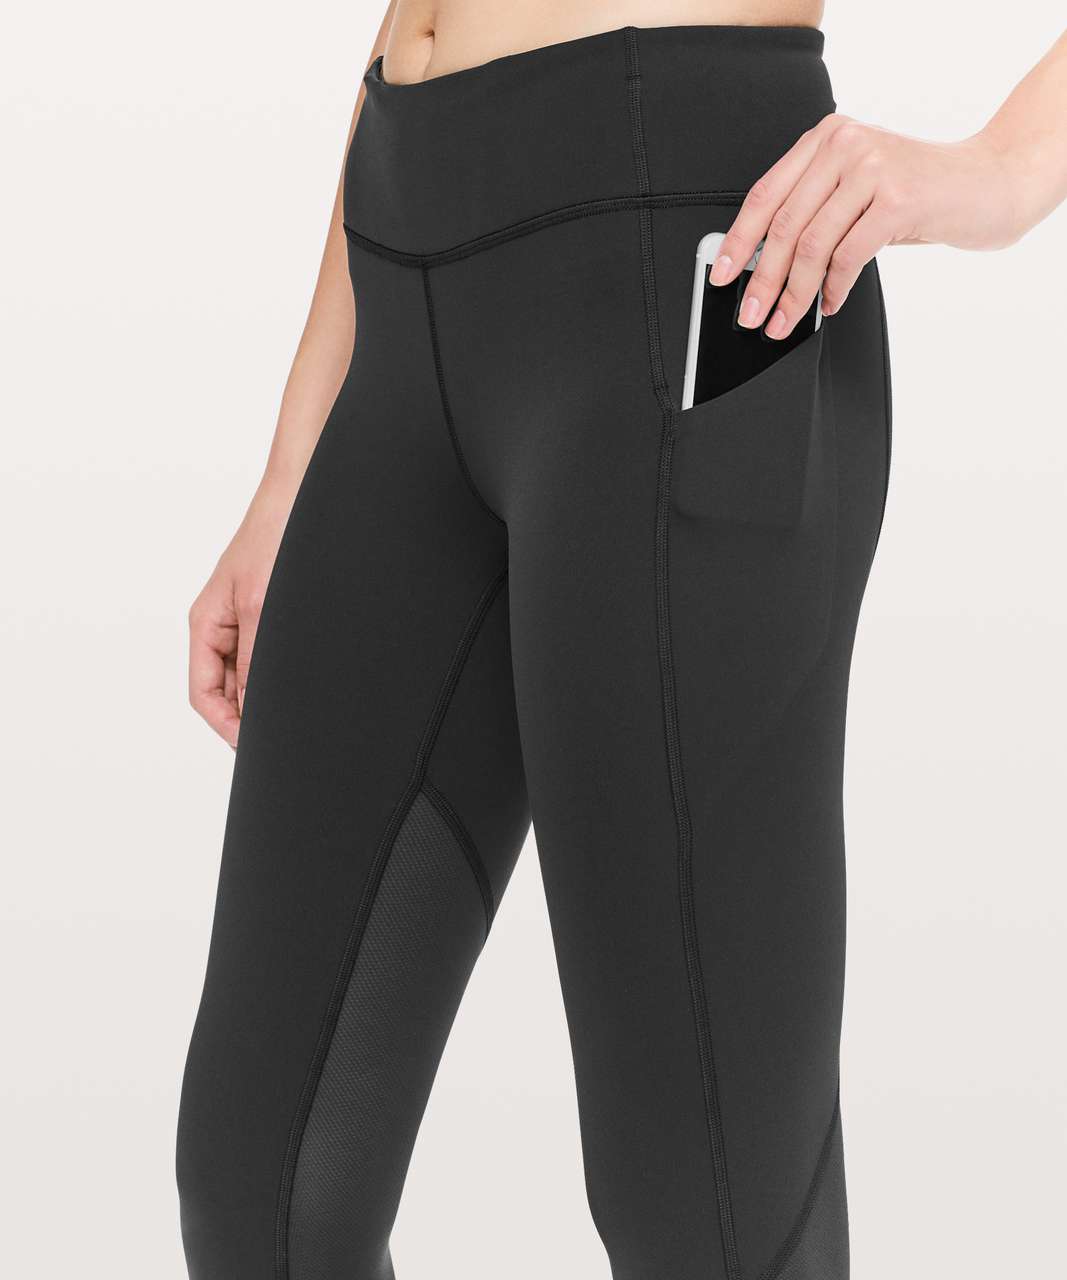 Lululemon Pace Rival Crop *Full-On Luxtreme 22" - Black